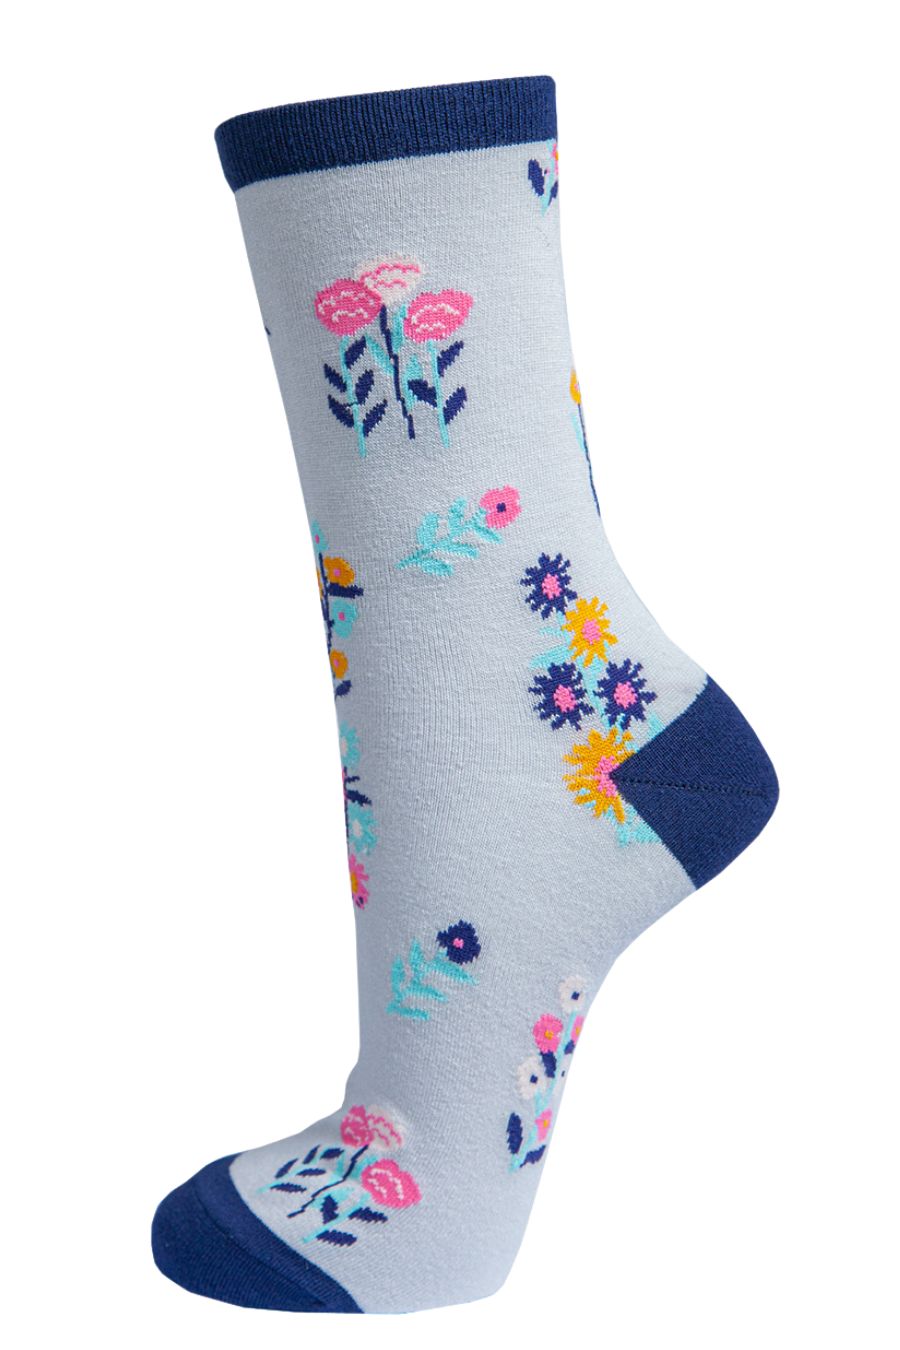 grey, navy blue ankle socks with an all over multicoloured ditsy floral pattern